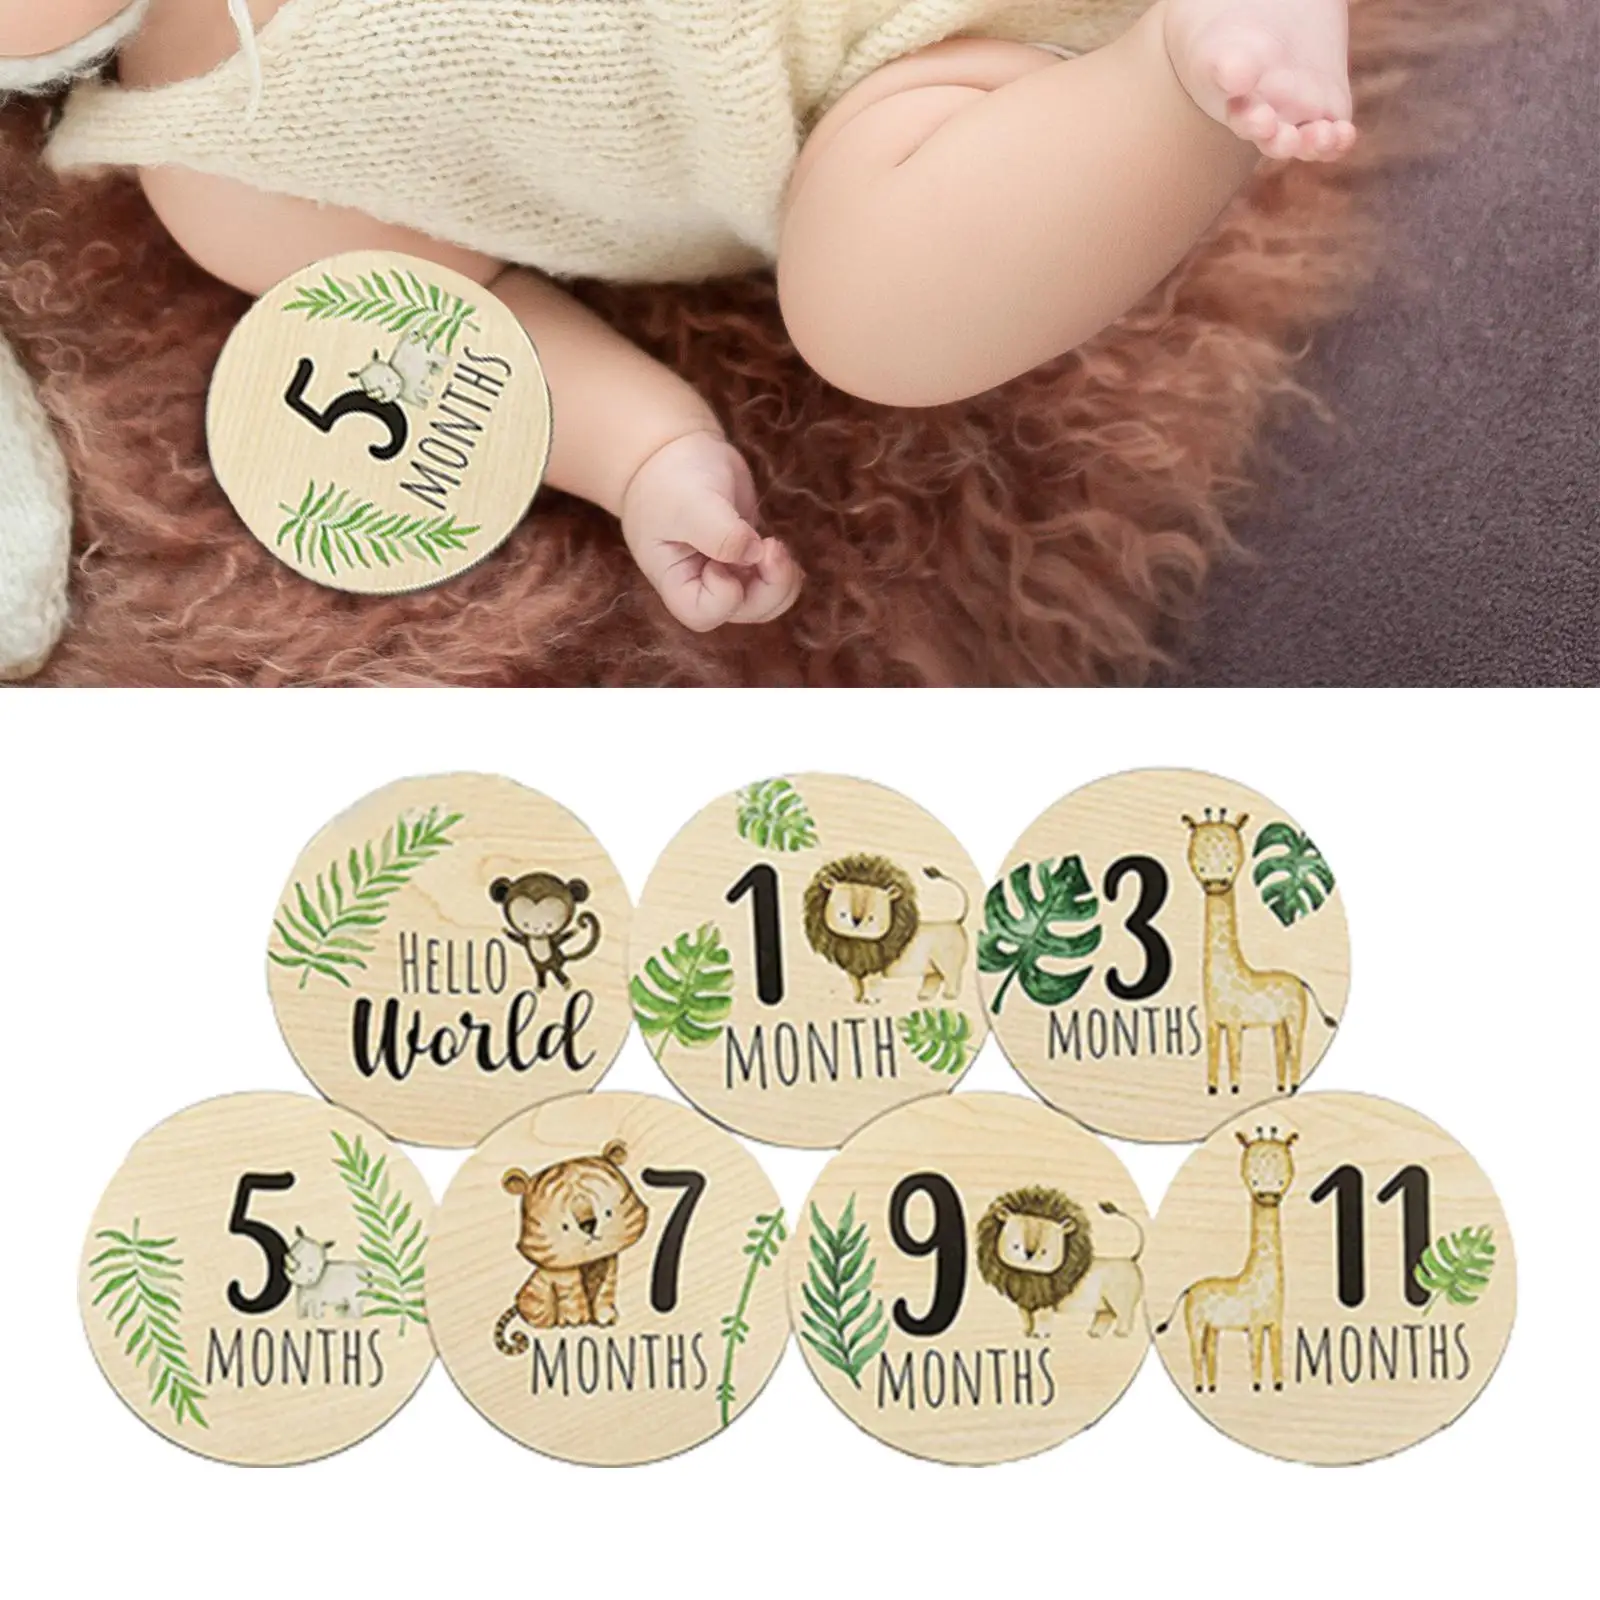 7x Wooden Baby Milestone Cards Baby Months Signs 1-12 Months Milestone Markers for Baby Growth Baby Shower